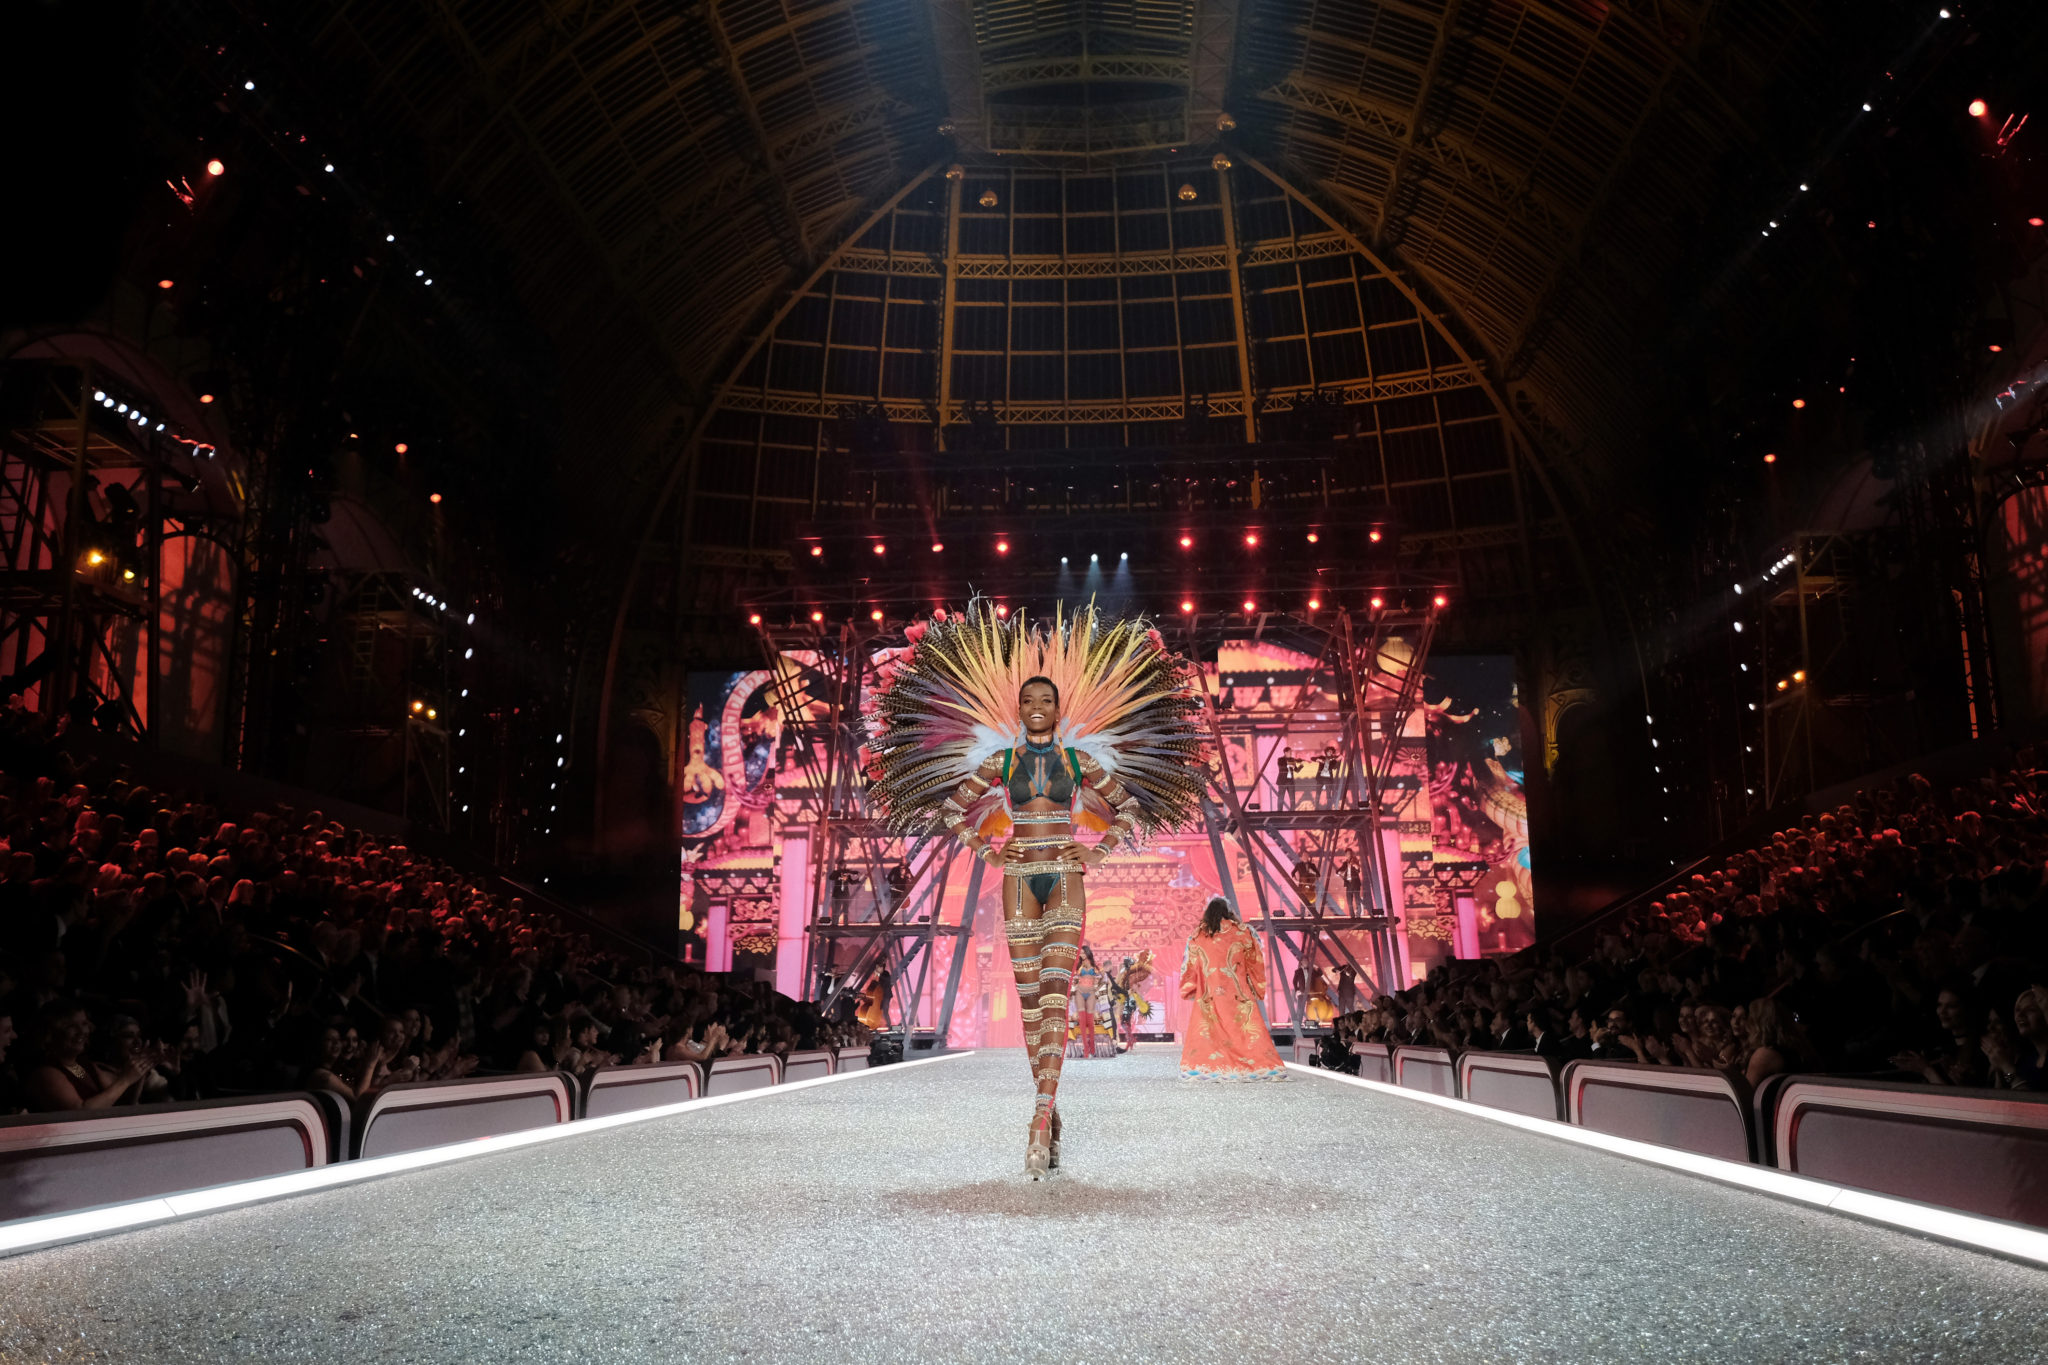 PARIS, FRANCE - NOVEMBER 30: Maria Borges walks the runway during the 2016 Victoria's Secret Fashion Show on November 30, 2016 in Paris, France. (Photo by Dimitrios Kambouris/Getty Images for Victoria's Secret)